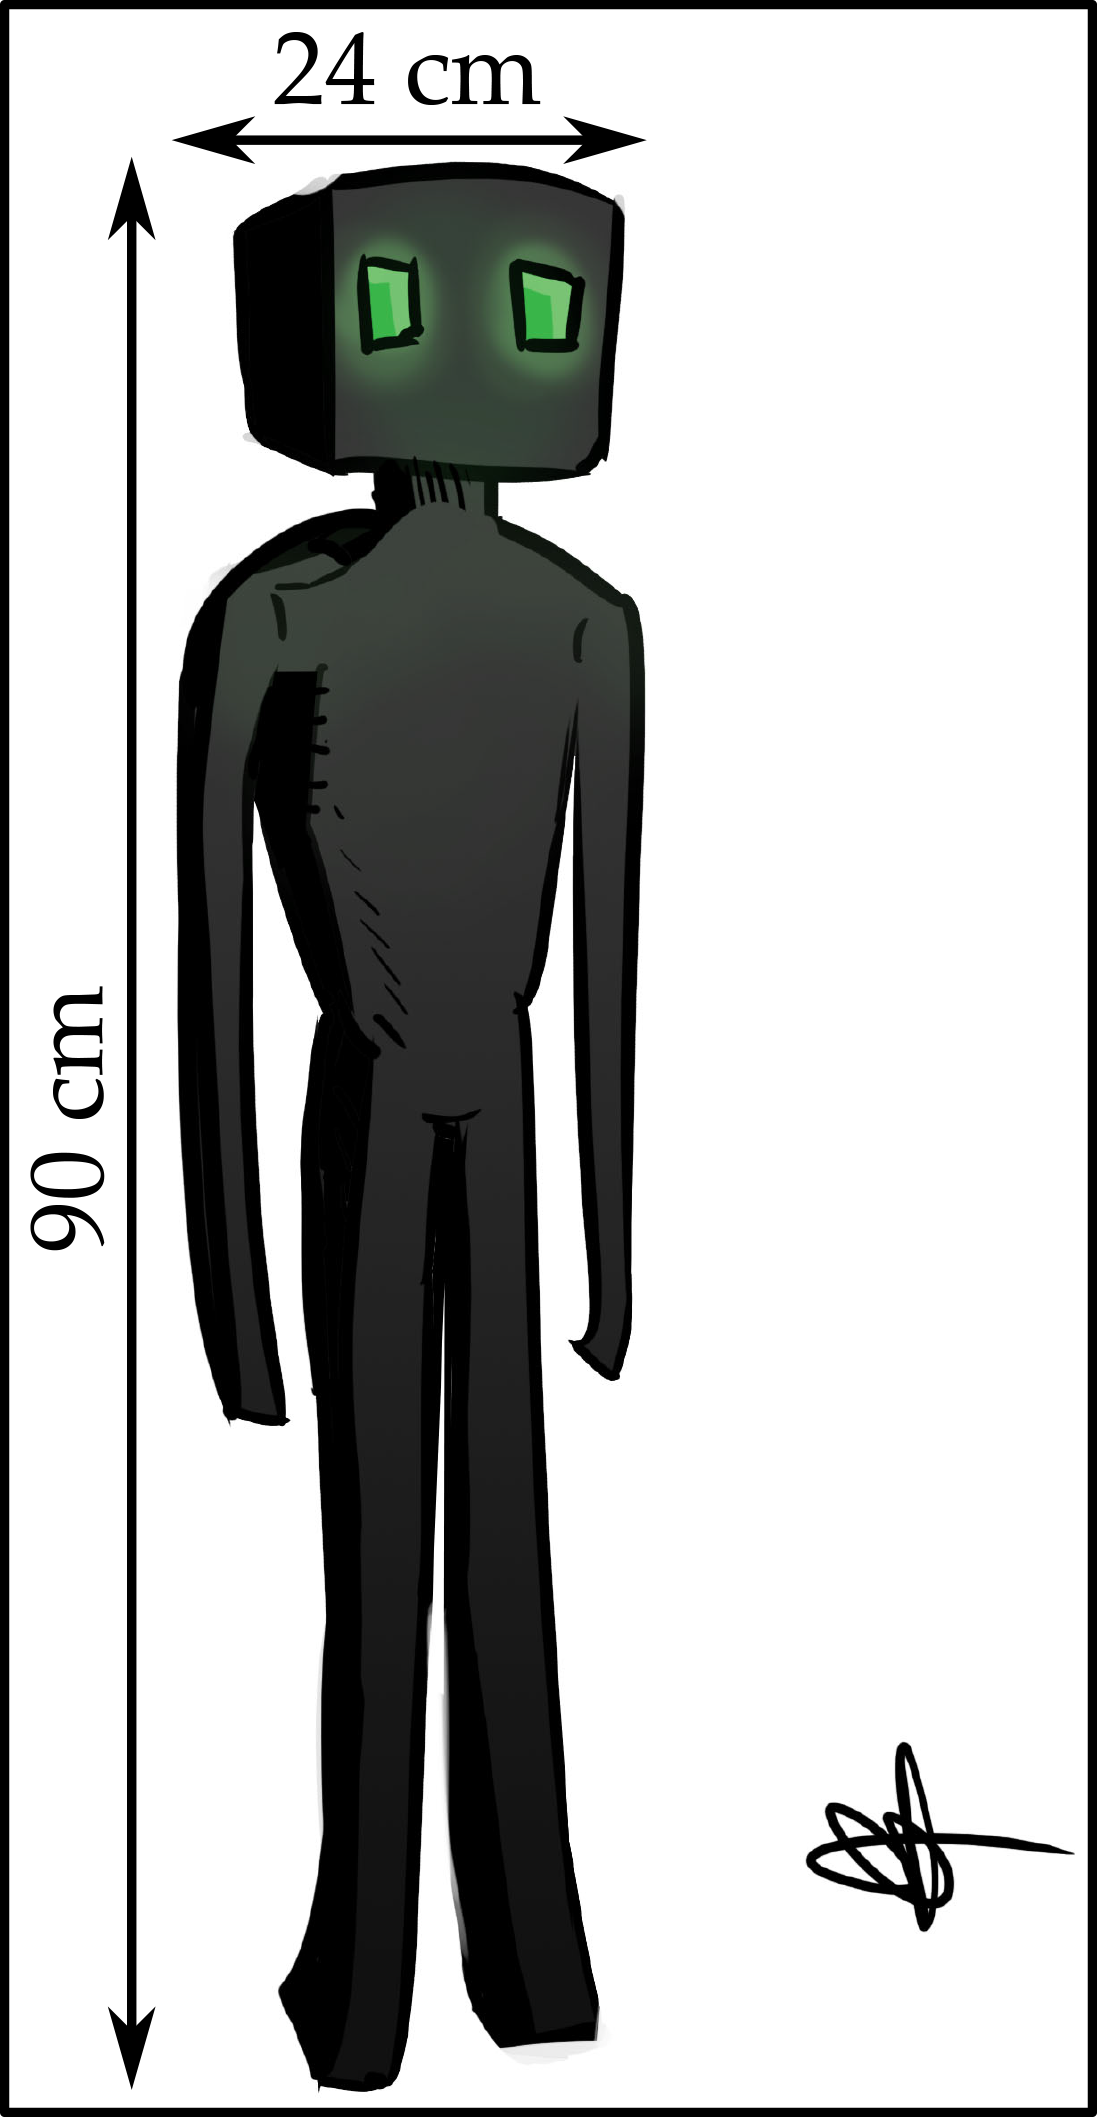 The picture of the enderman. The enderman is 90 cm tall and 24 cm wide.